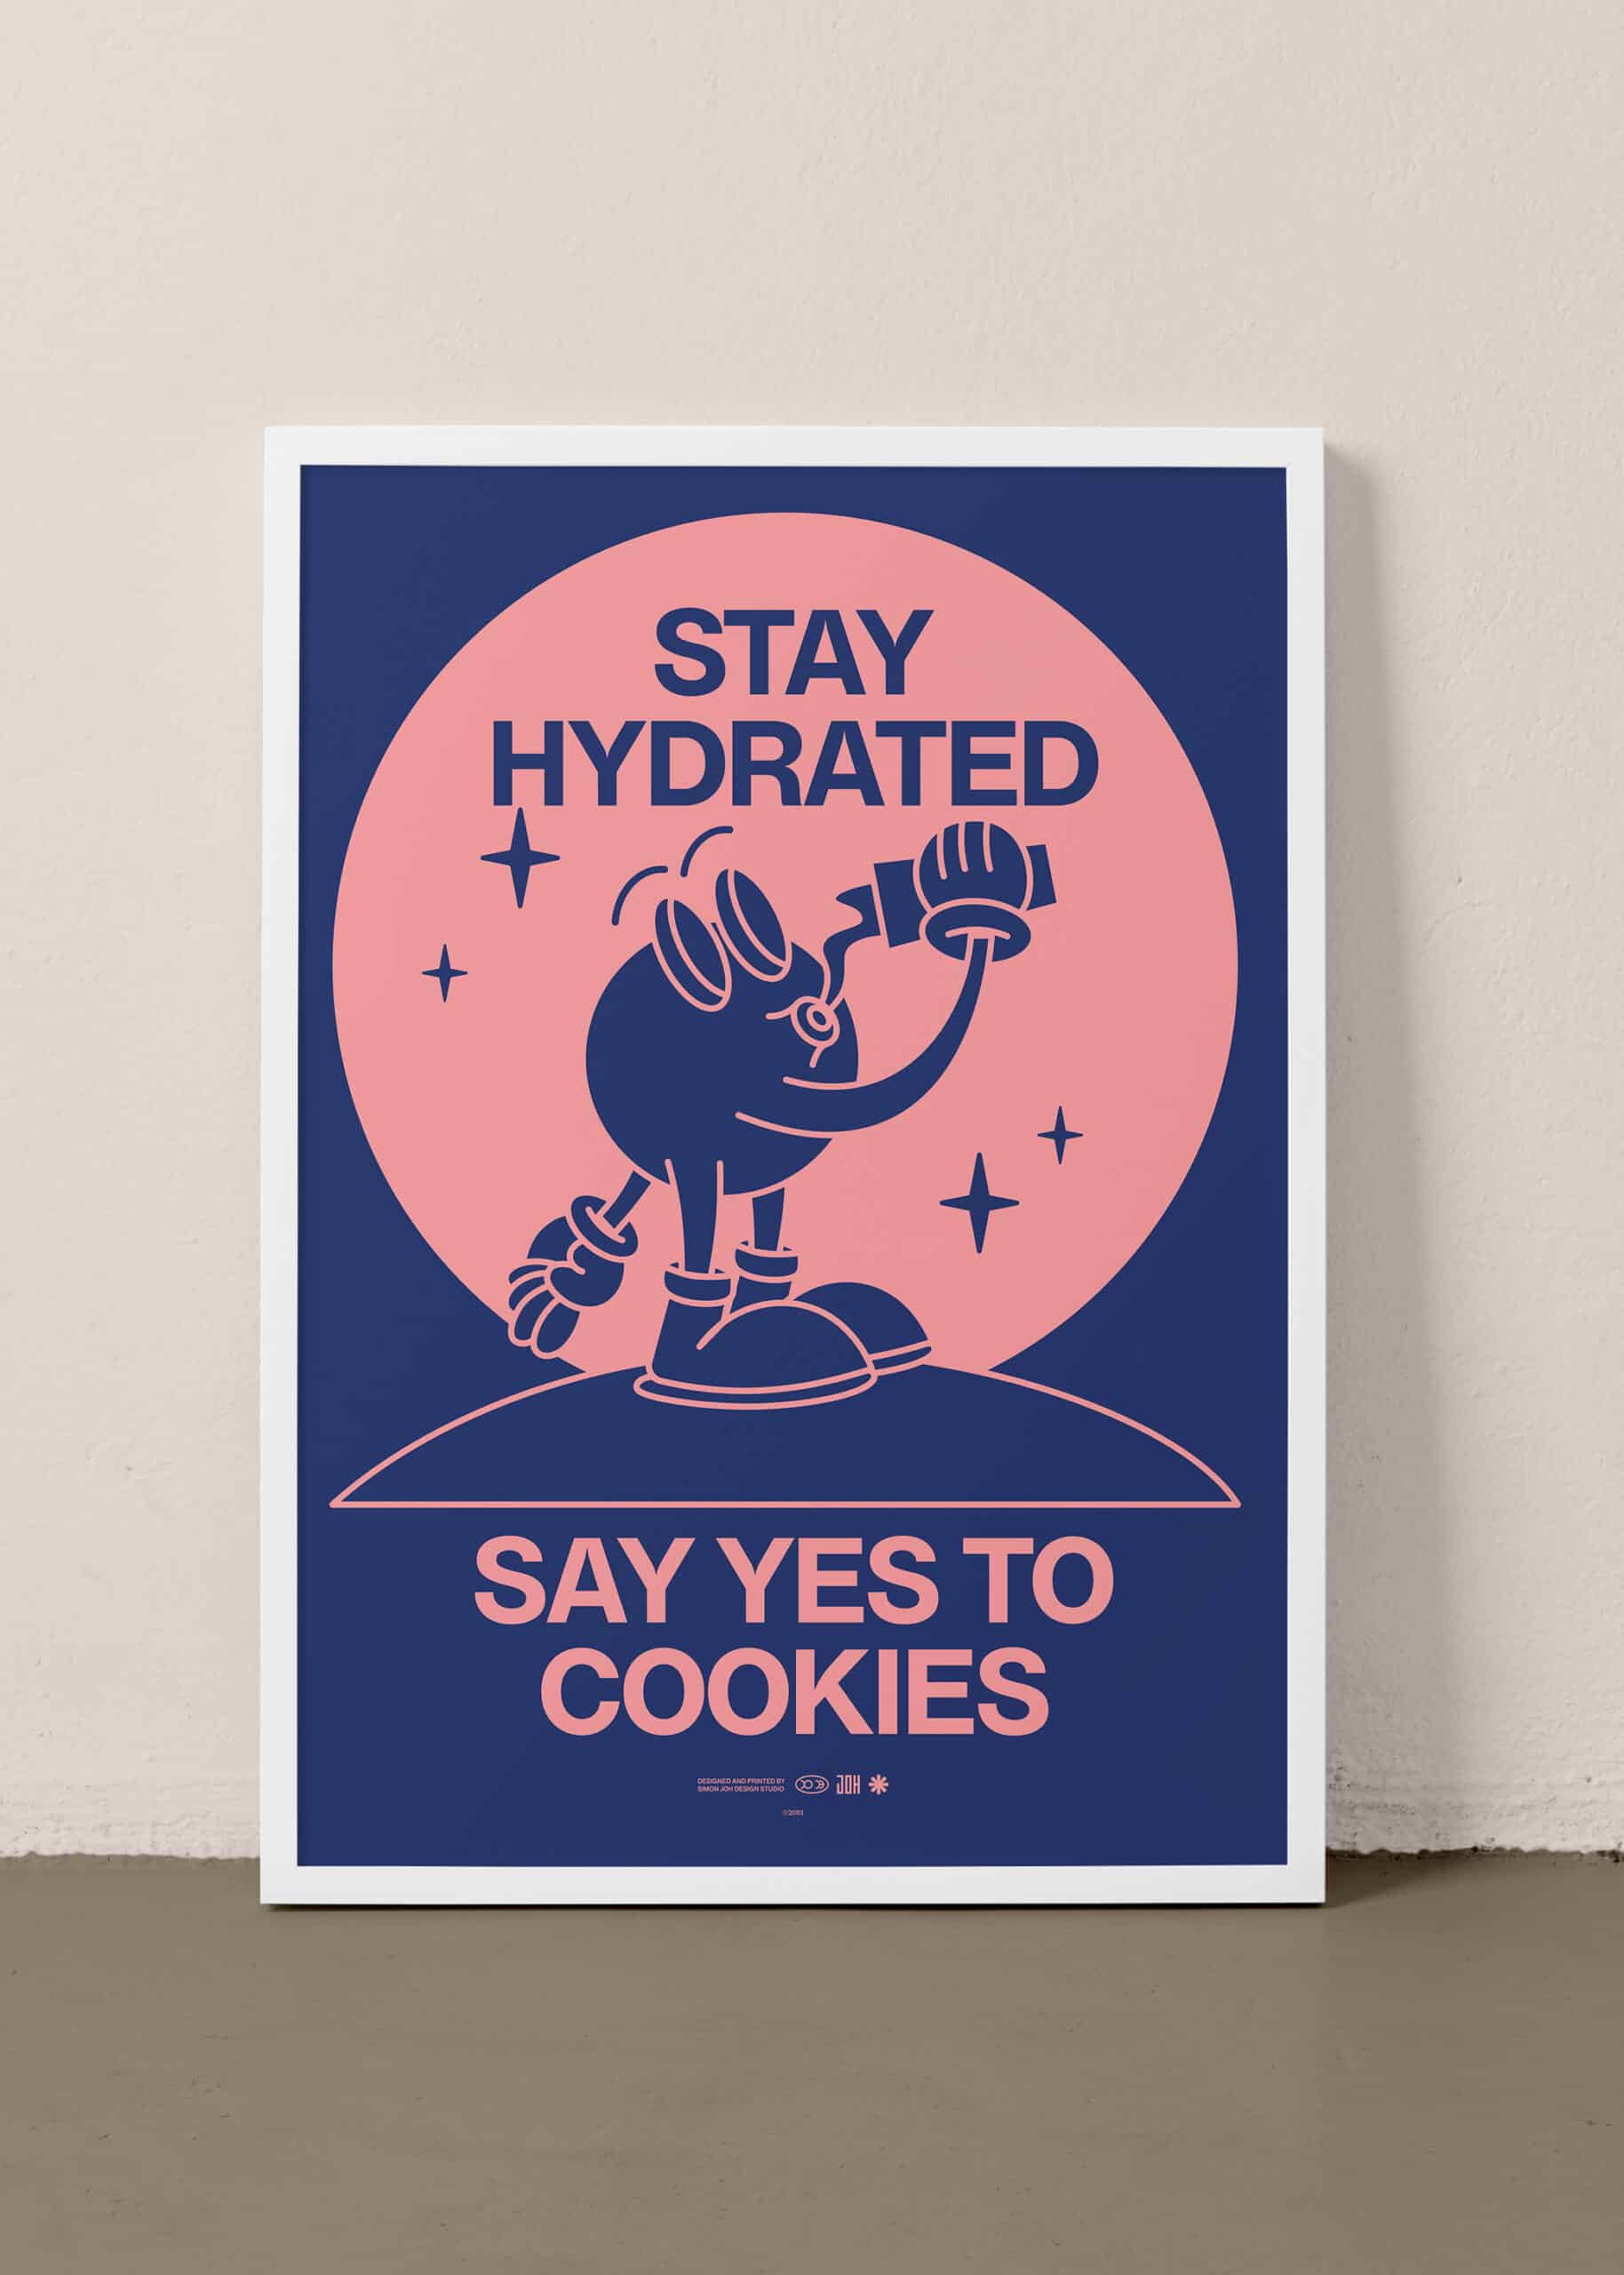 joh-poster_hydrated@2x